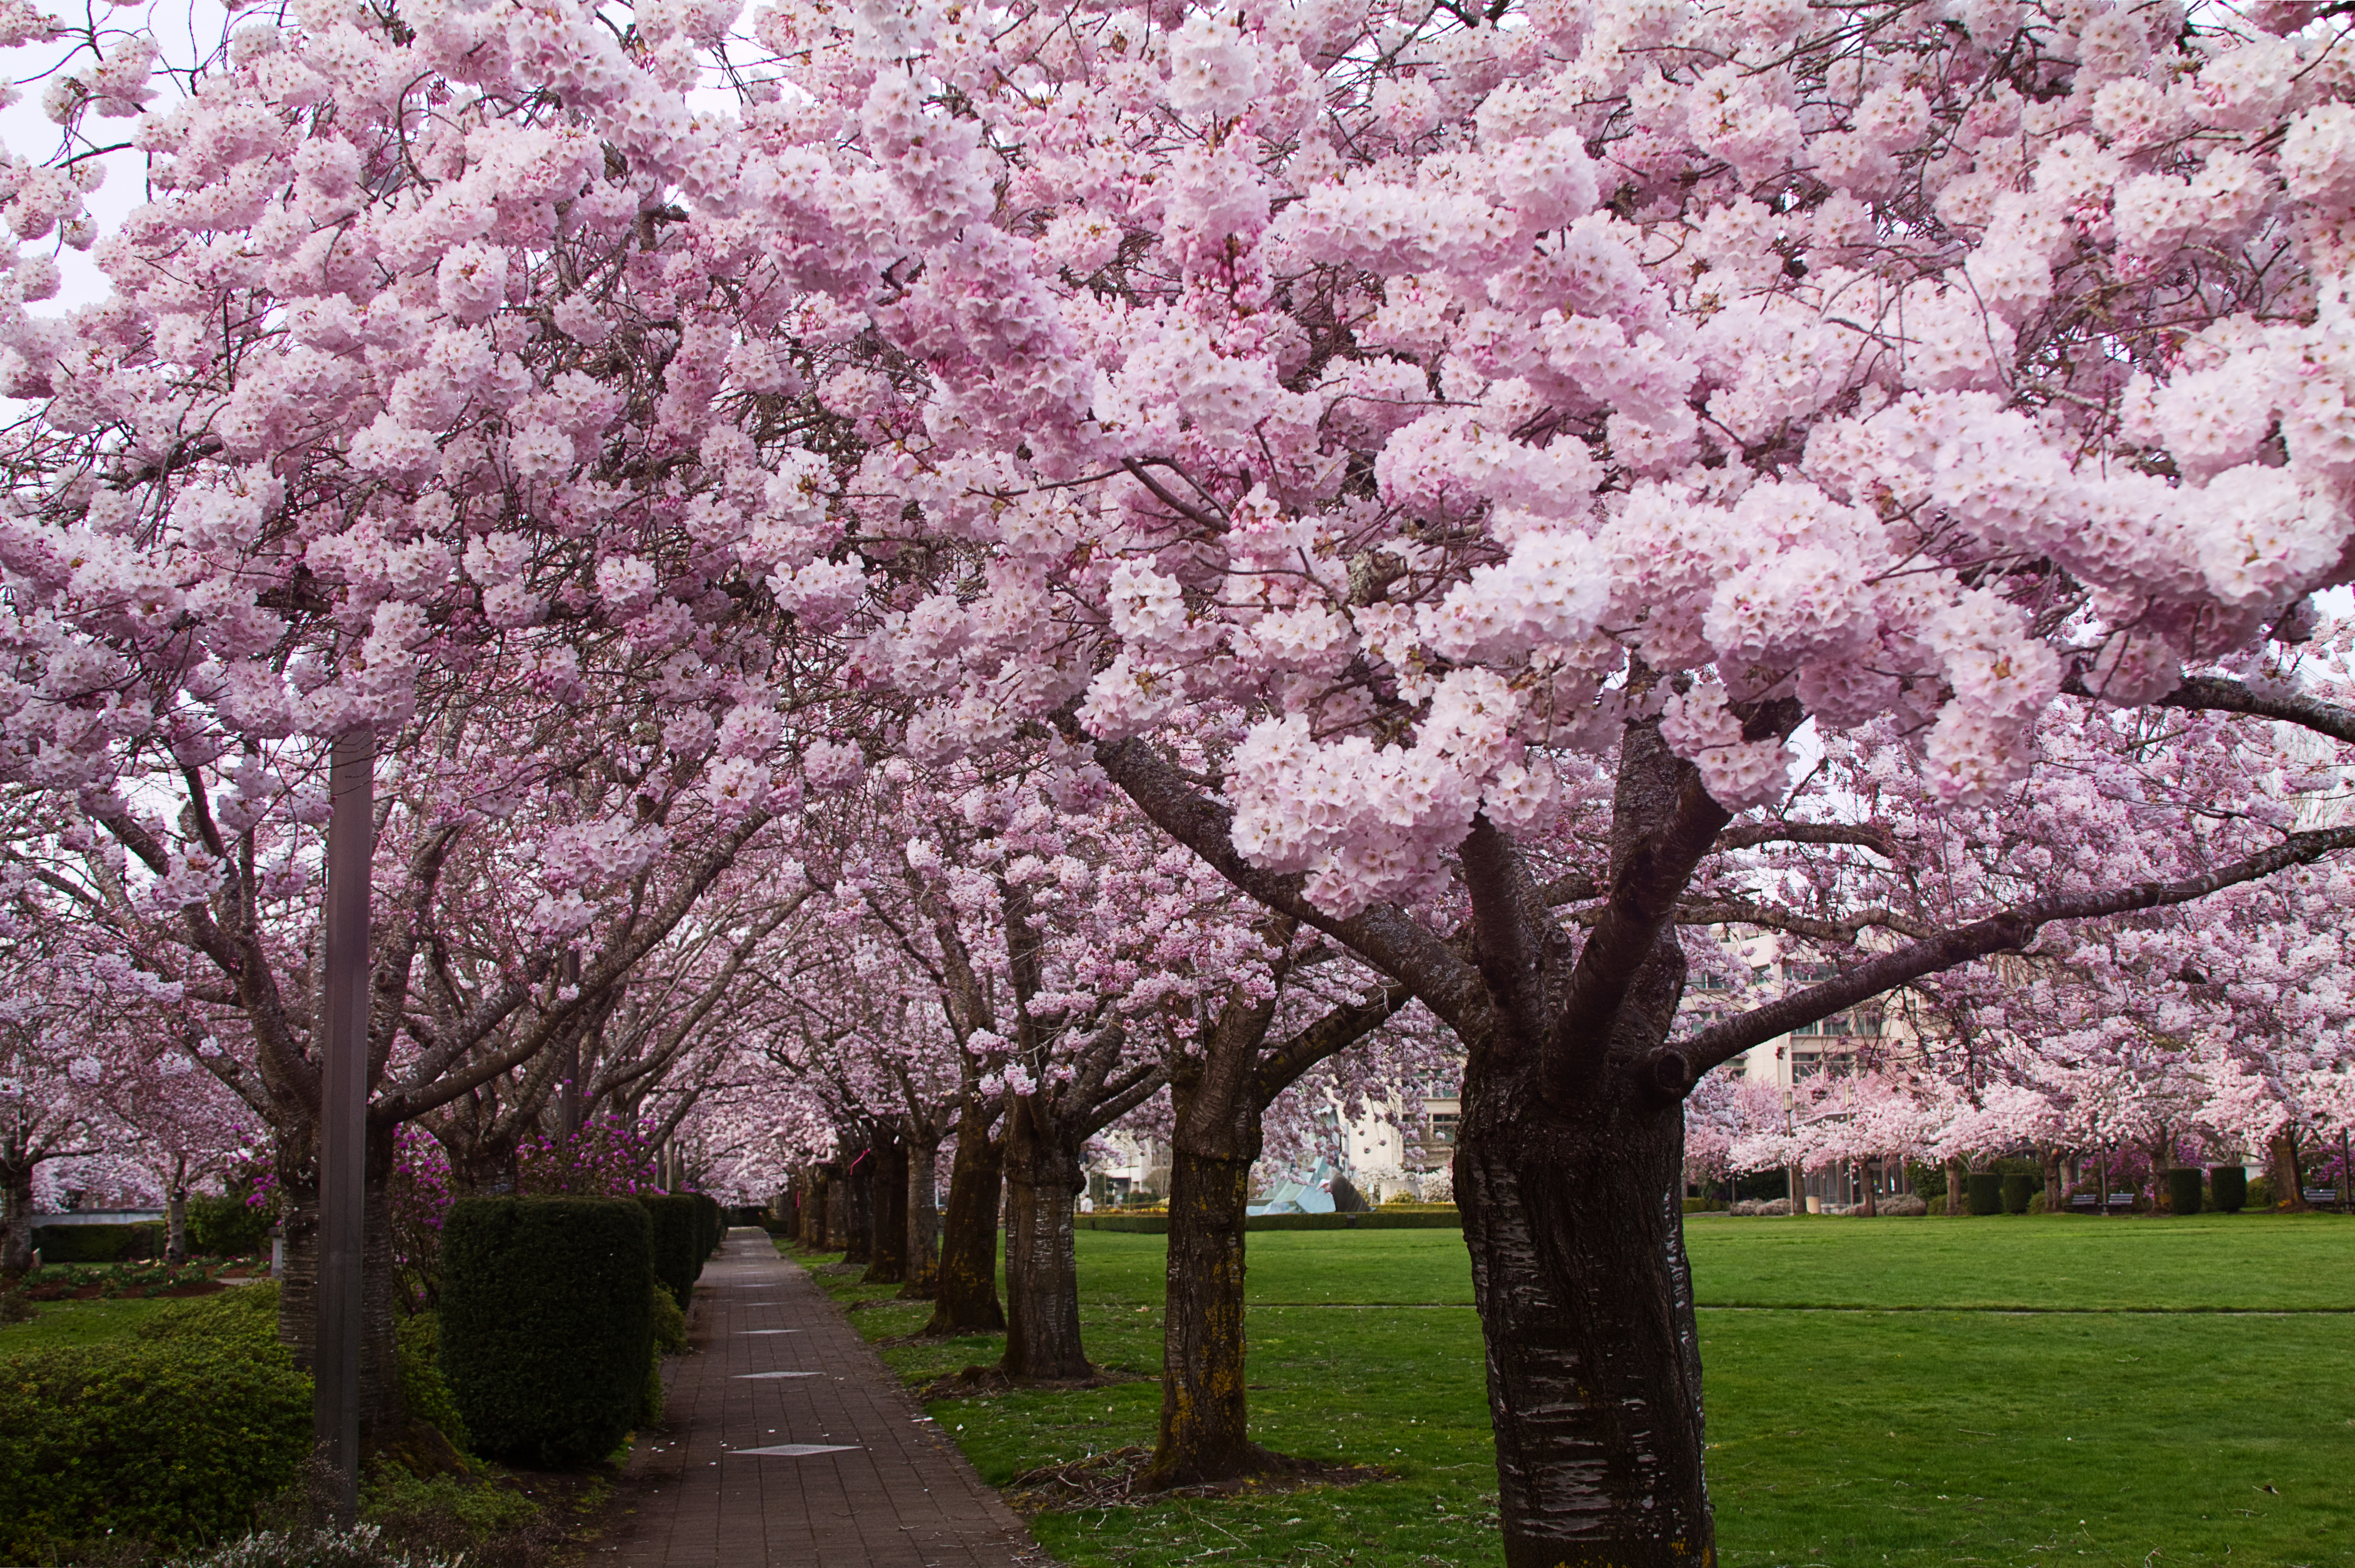 Image of Cherry blossom tree in blossom free to use